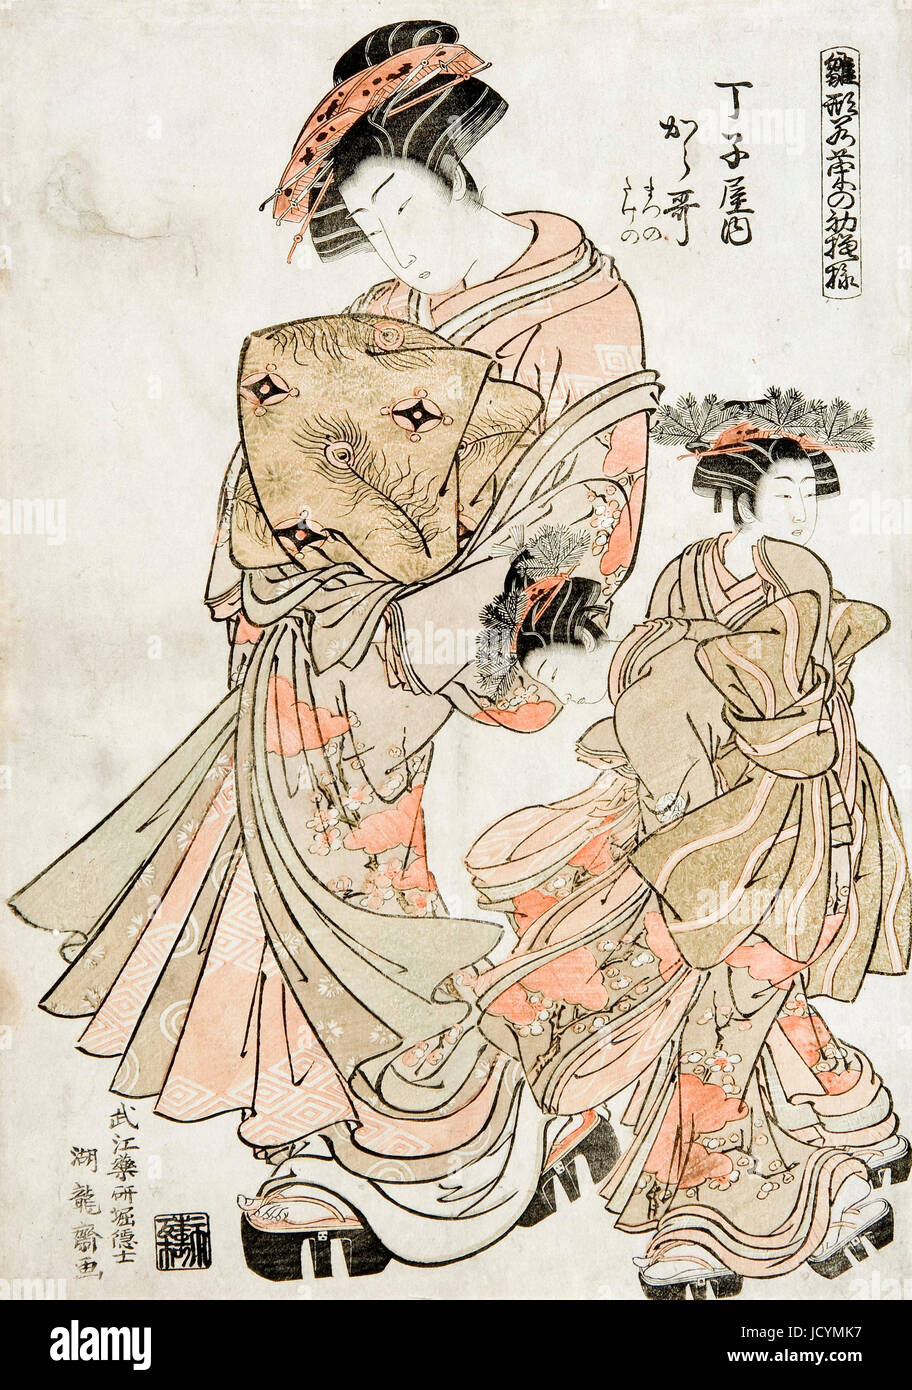 Isoda Koryusai, New Designs as Fresh as Young Leaves 1778 Woodcut. National Museums of World Culture, Goteborg, Sweden. Stock Photo